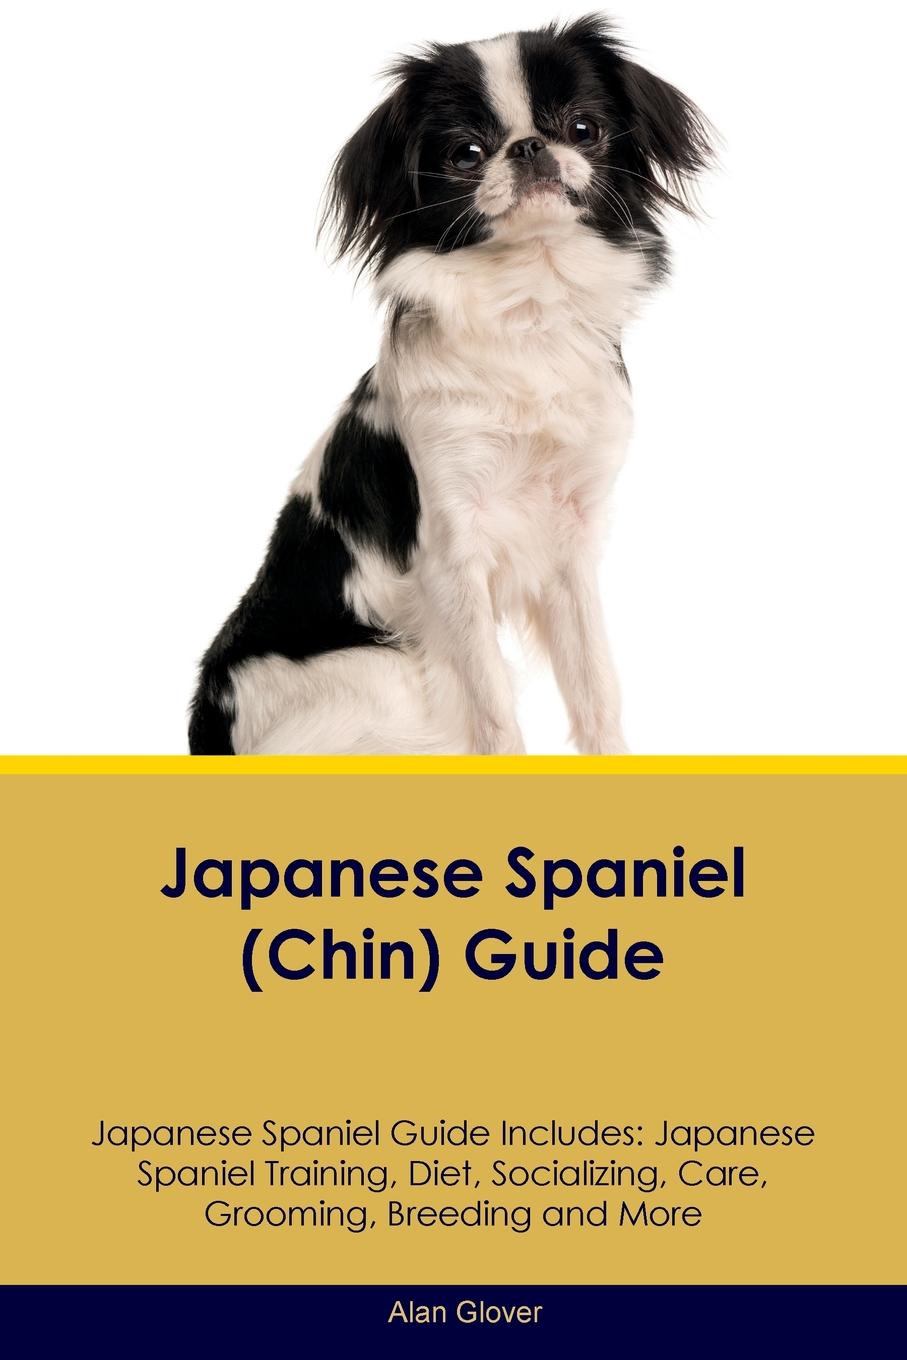 Japanese Spaniel (Chin) Guide Japanese Spaniel Guide Includes. Japanese Spaniel Training, Diet, Socializing, Care, Grooming, Breeding and More